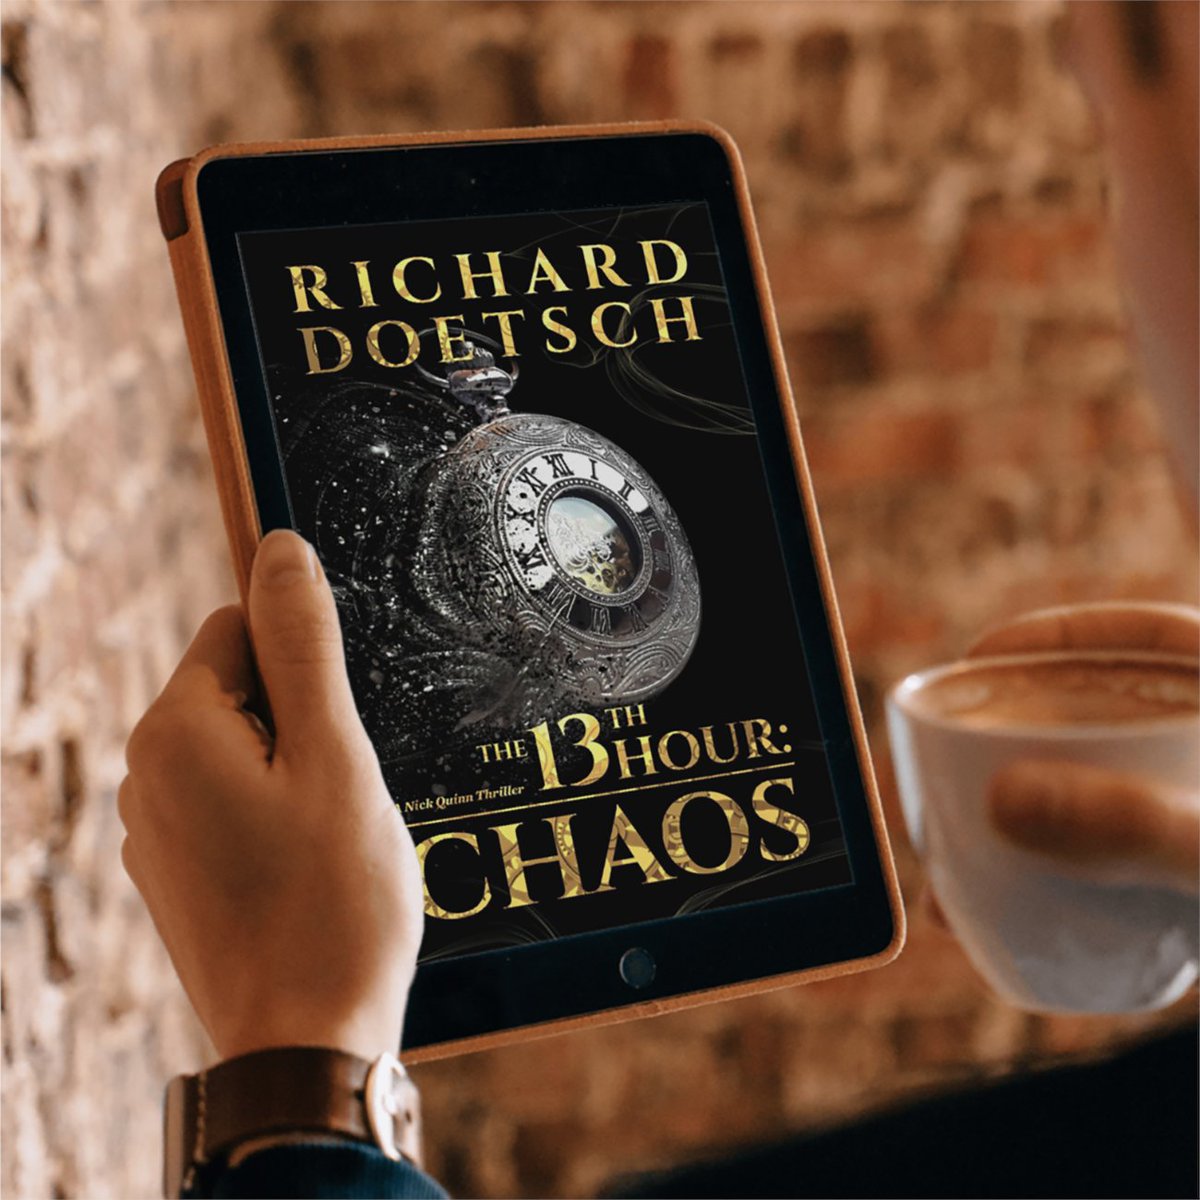 Love this #authorconfession featuring @richarddoetsch and his #book The 13th Hour: Chaos on - The Mystery of Writing - @Elena_TaylorAut bit.ly/3CZ6UhA #bookstoread #whattoreadnext #bookbuyer #bookobsessed #bookclub #bedtimereading #mysterythriller